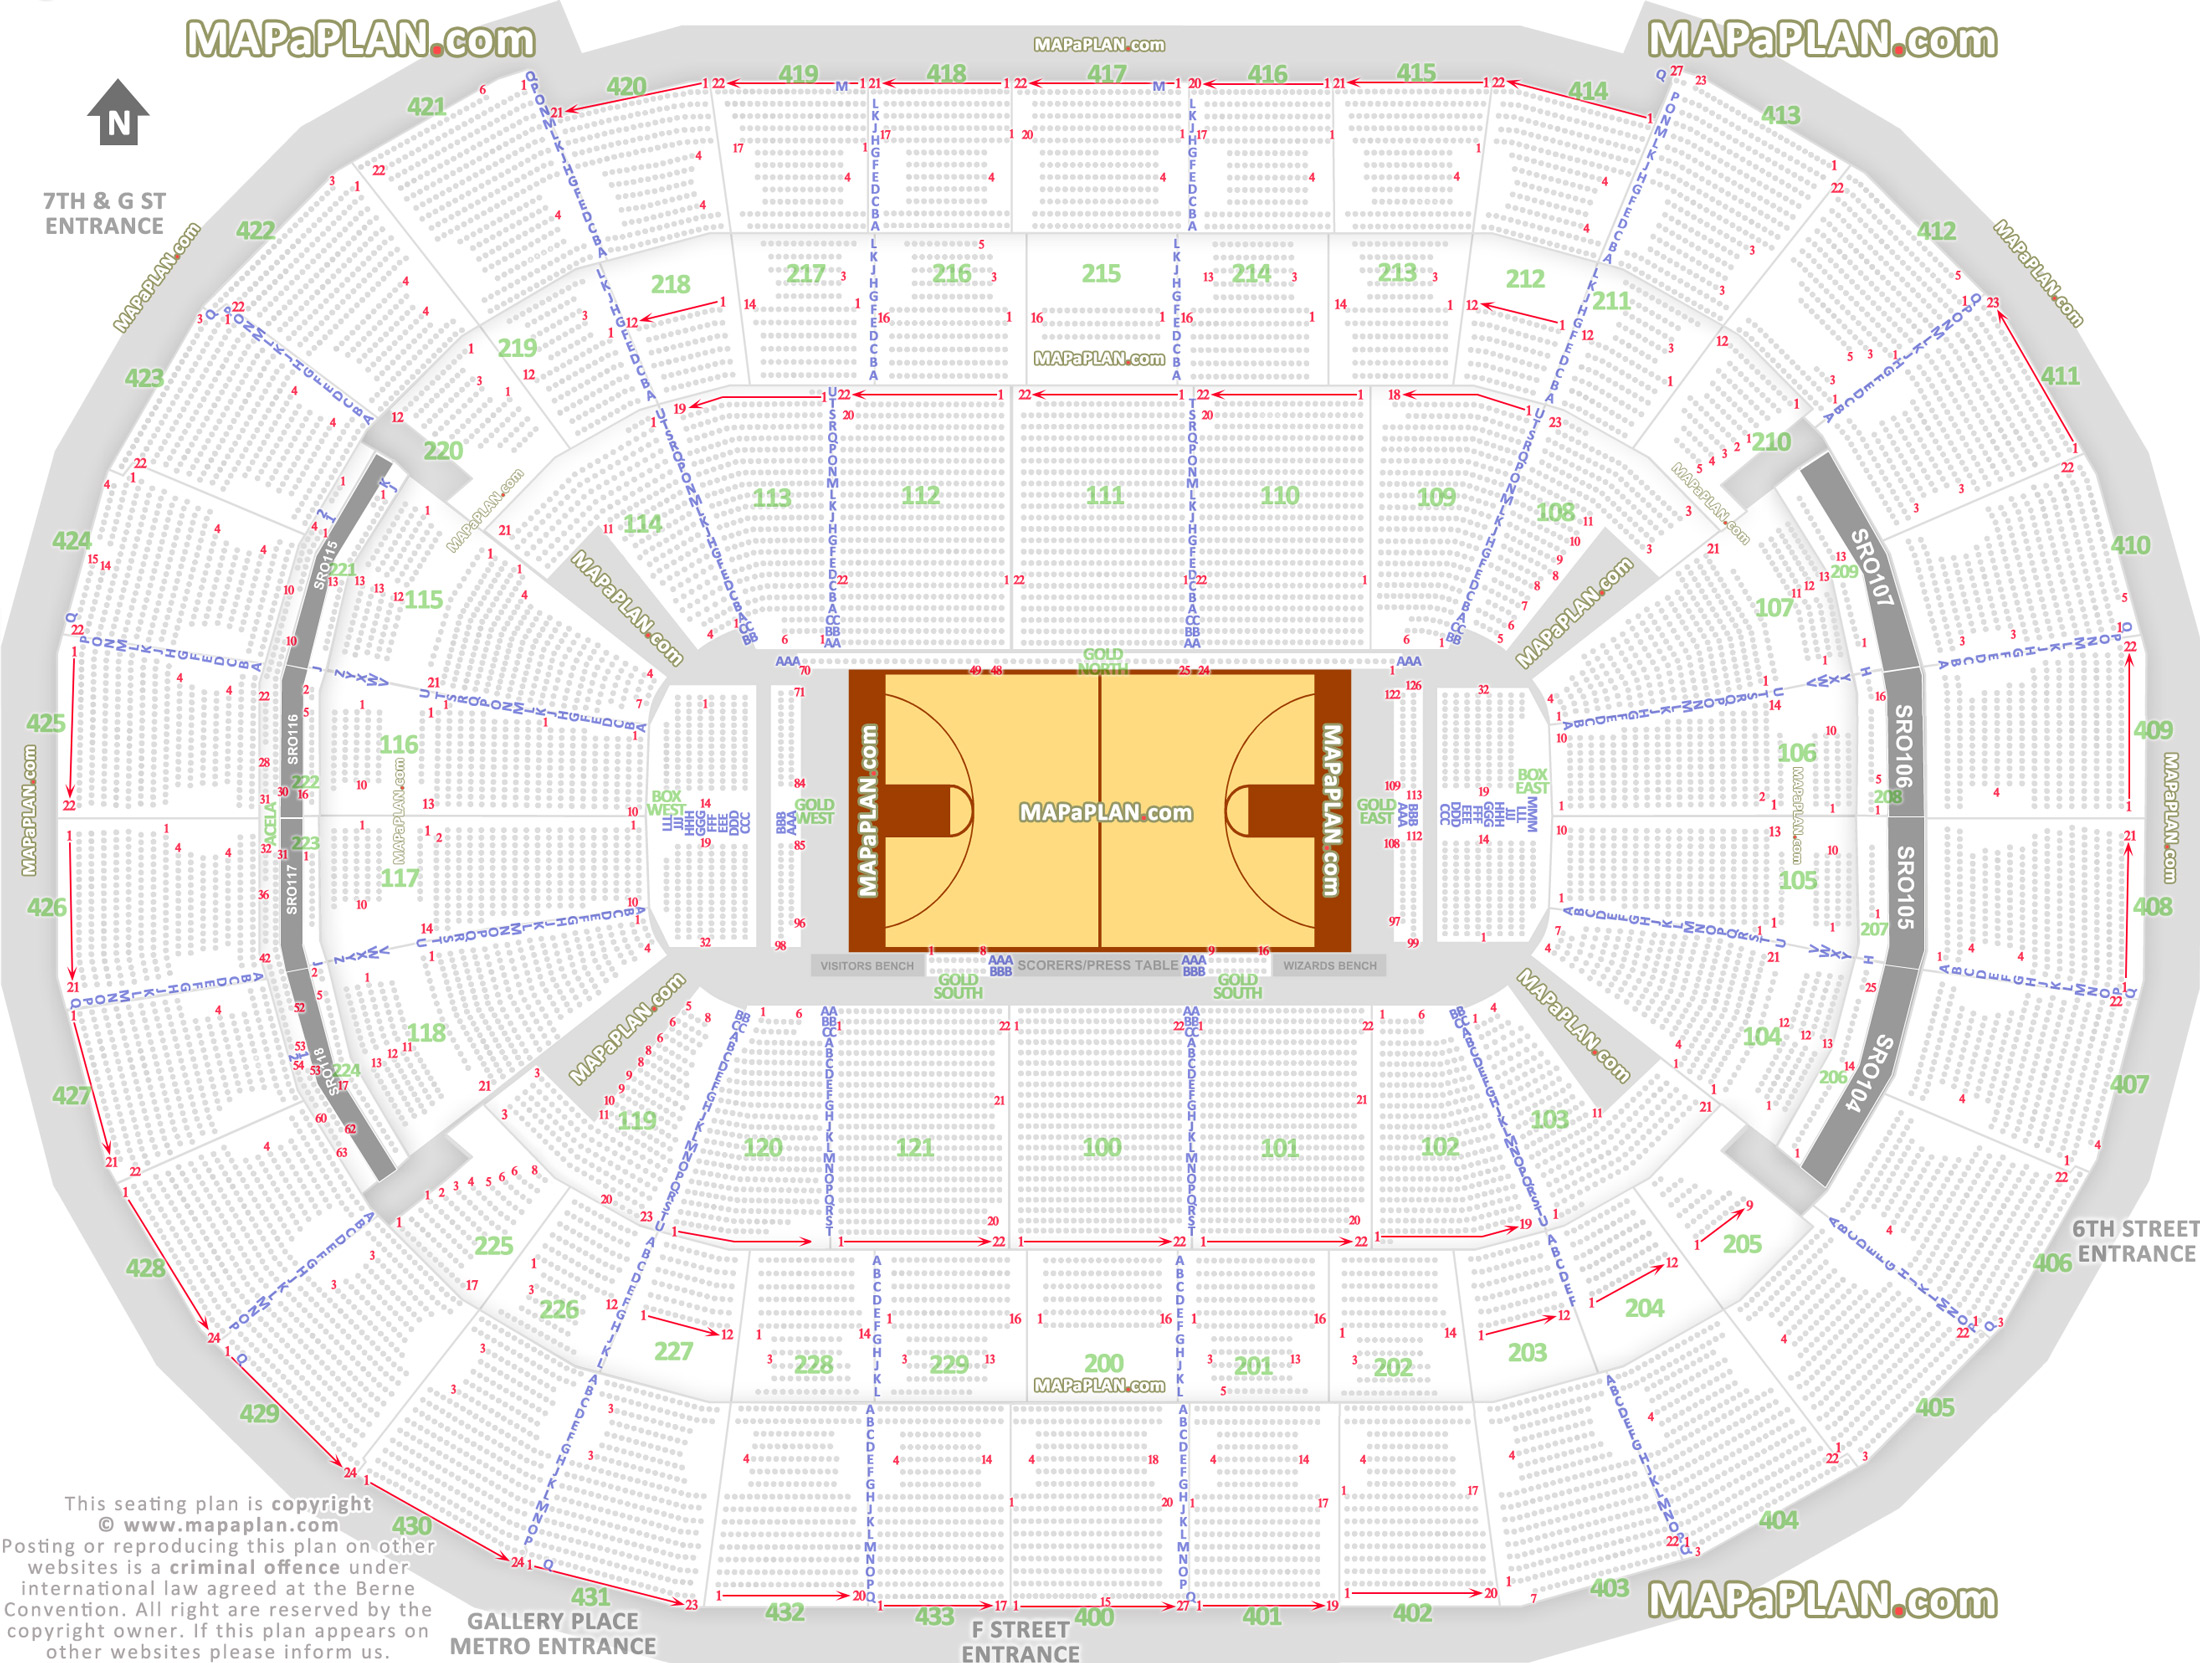 Washington Wizards Seating Chart With Seat Numbers